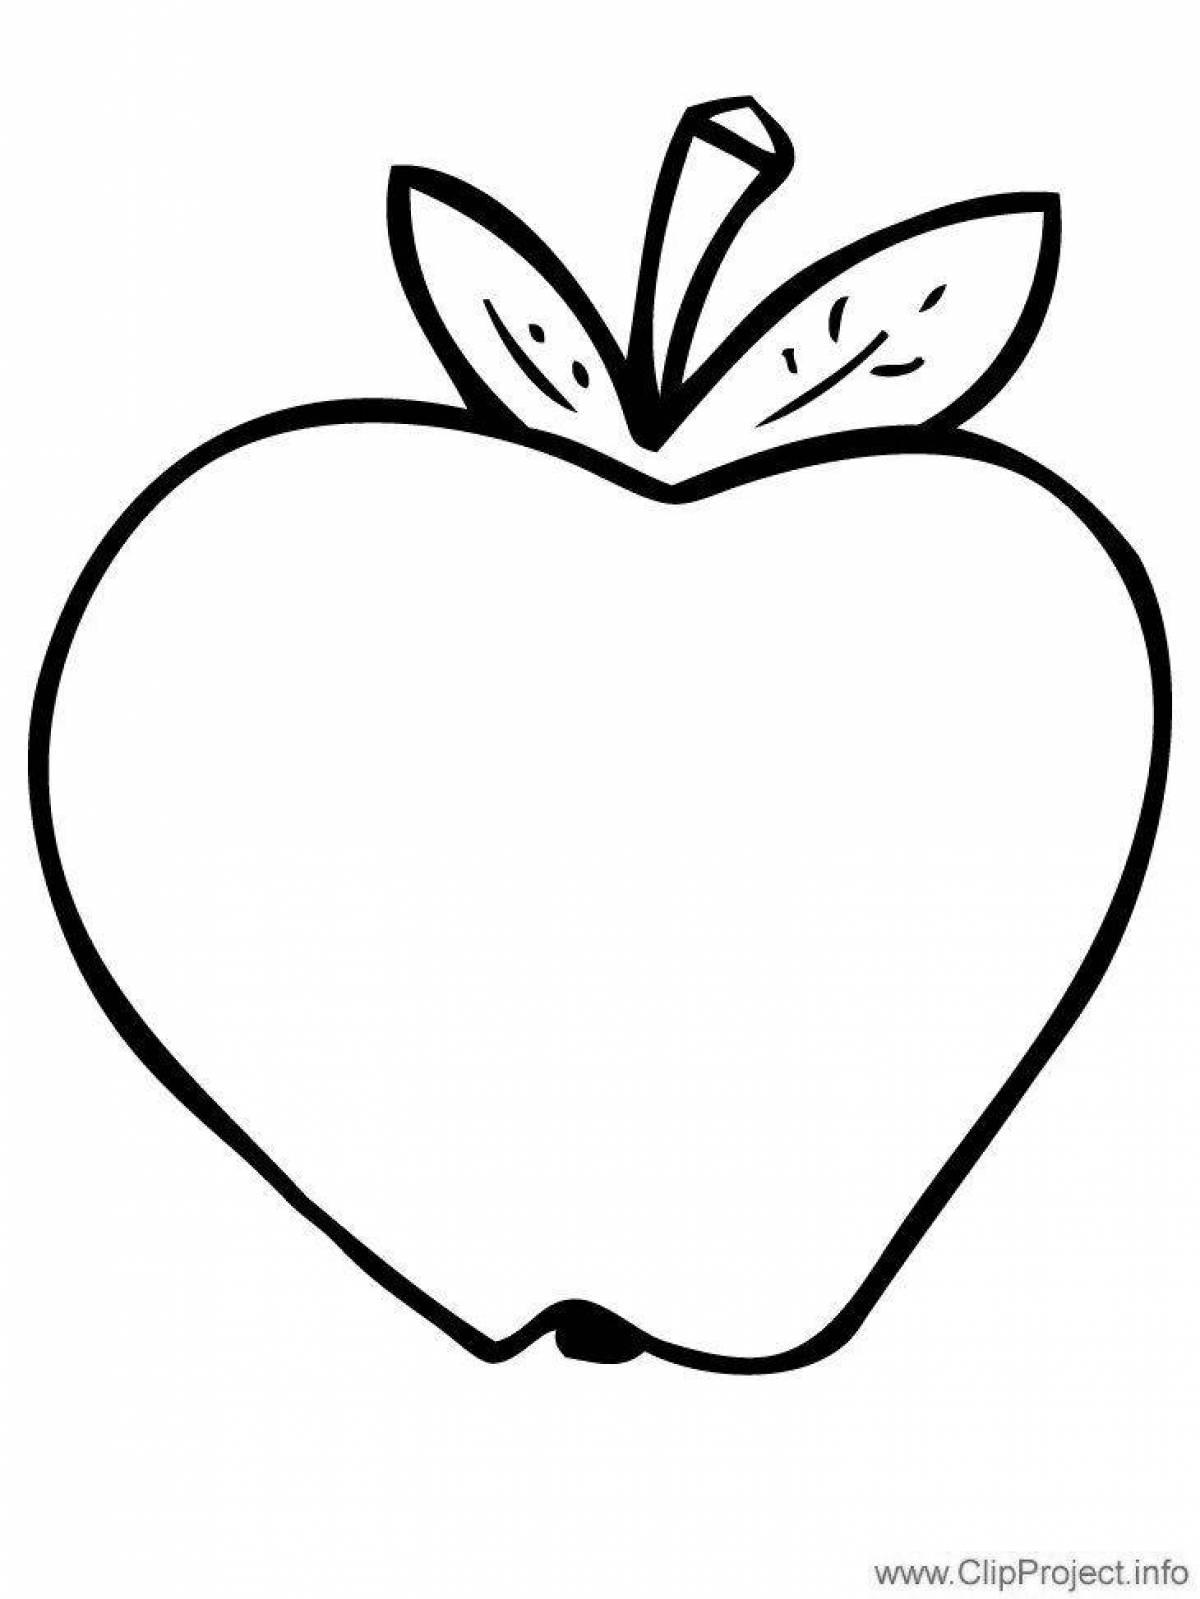 Coloring book shining apple